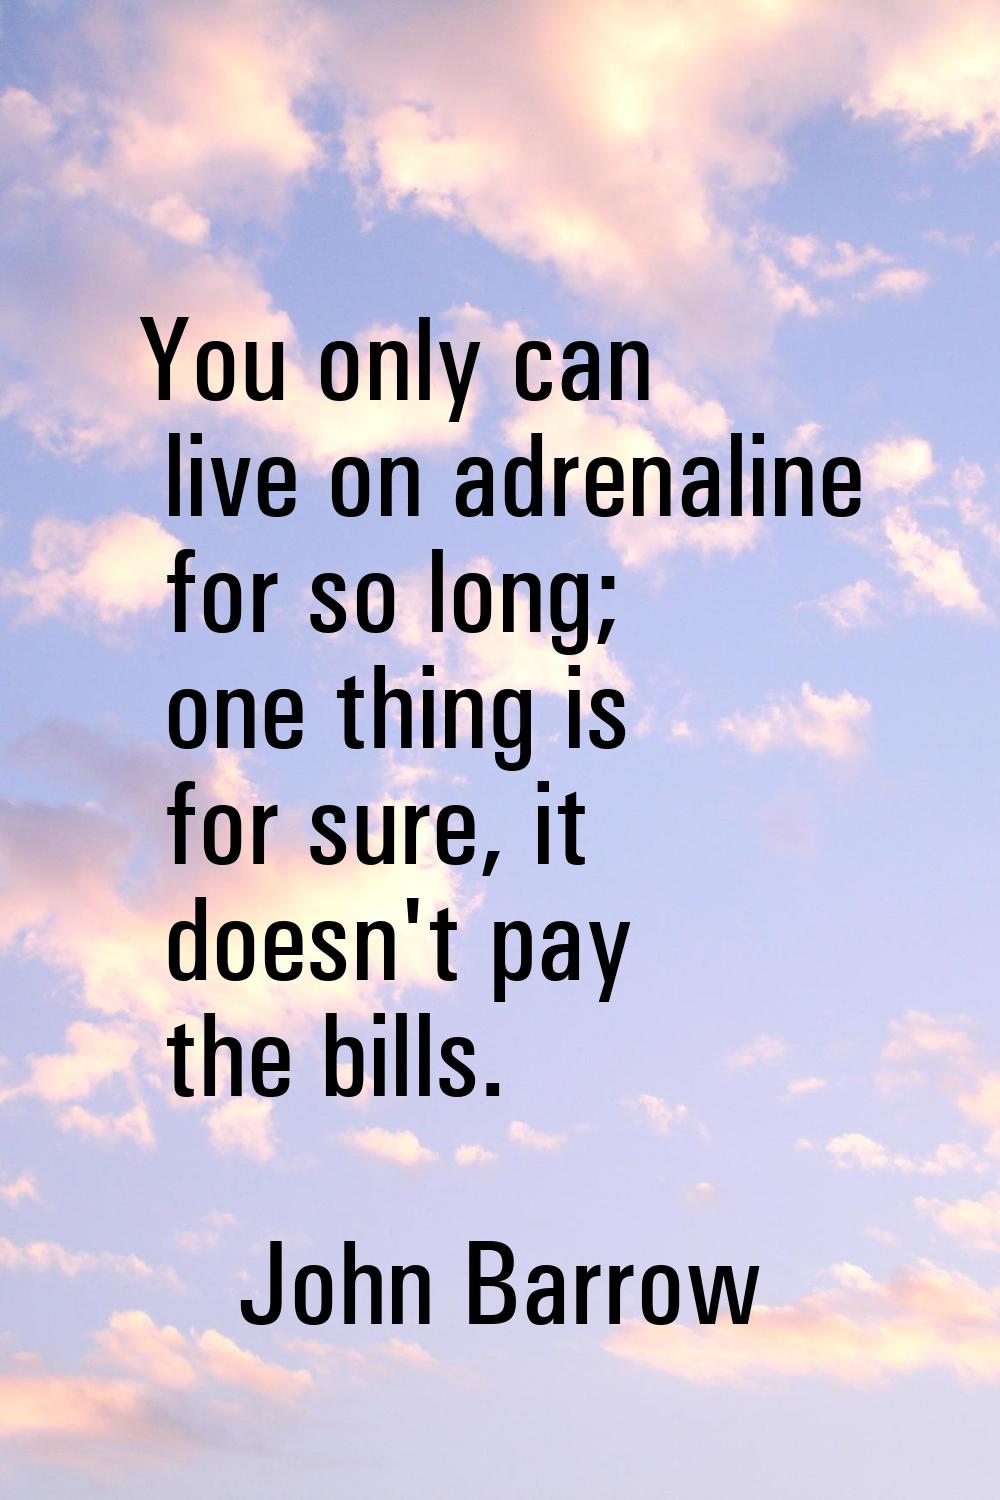 You only can live on adrenaline for so long; one thing is for sure, it doesn't pay the bills.